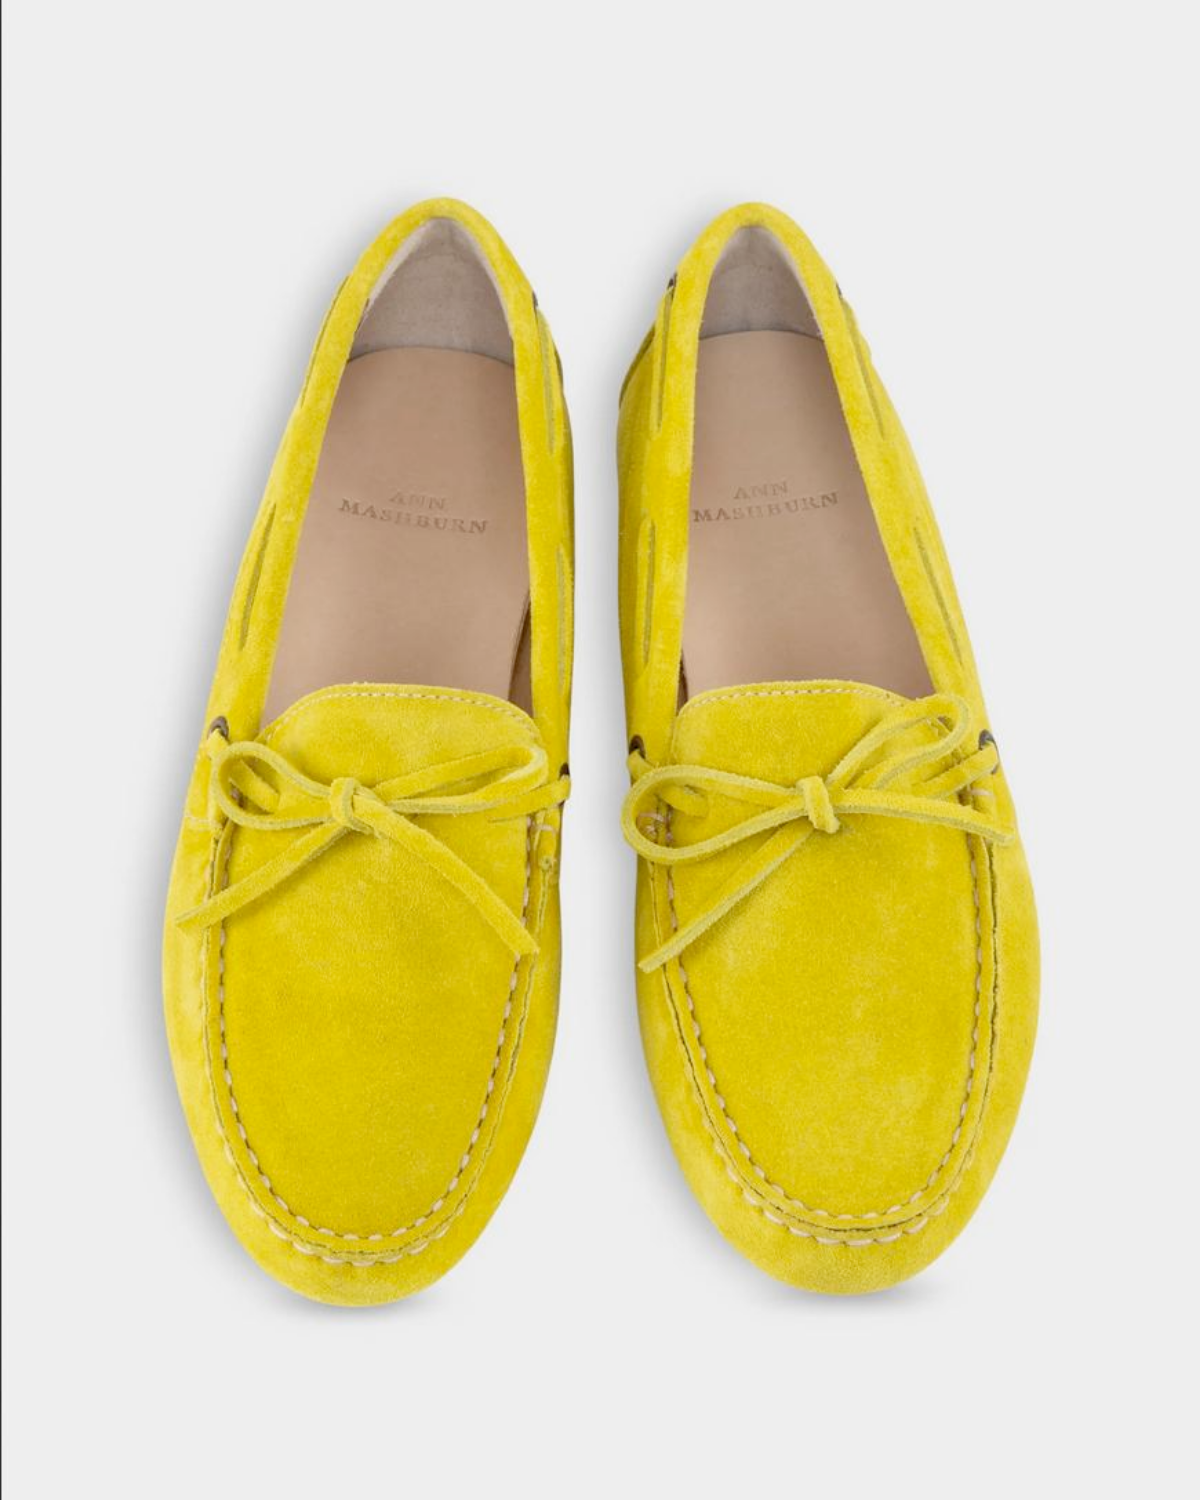 Driving Moccasin (Yellow Suede)